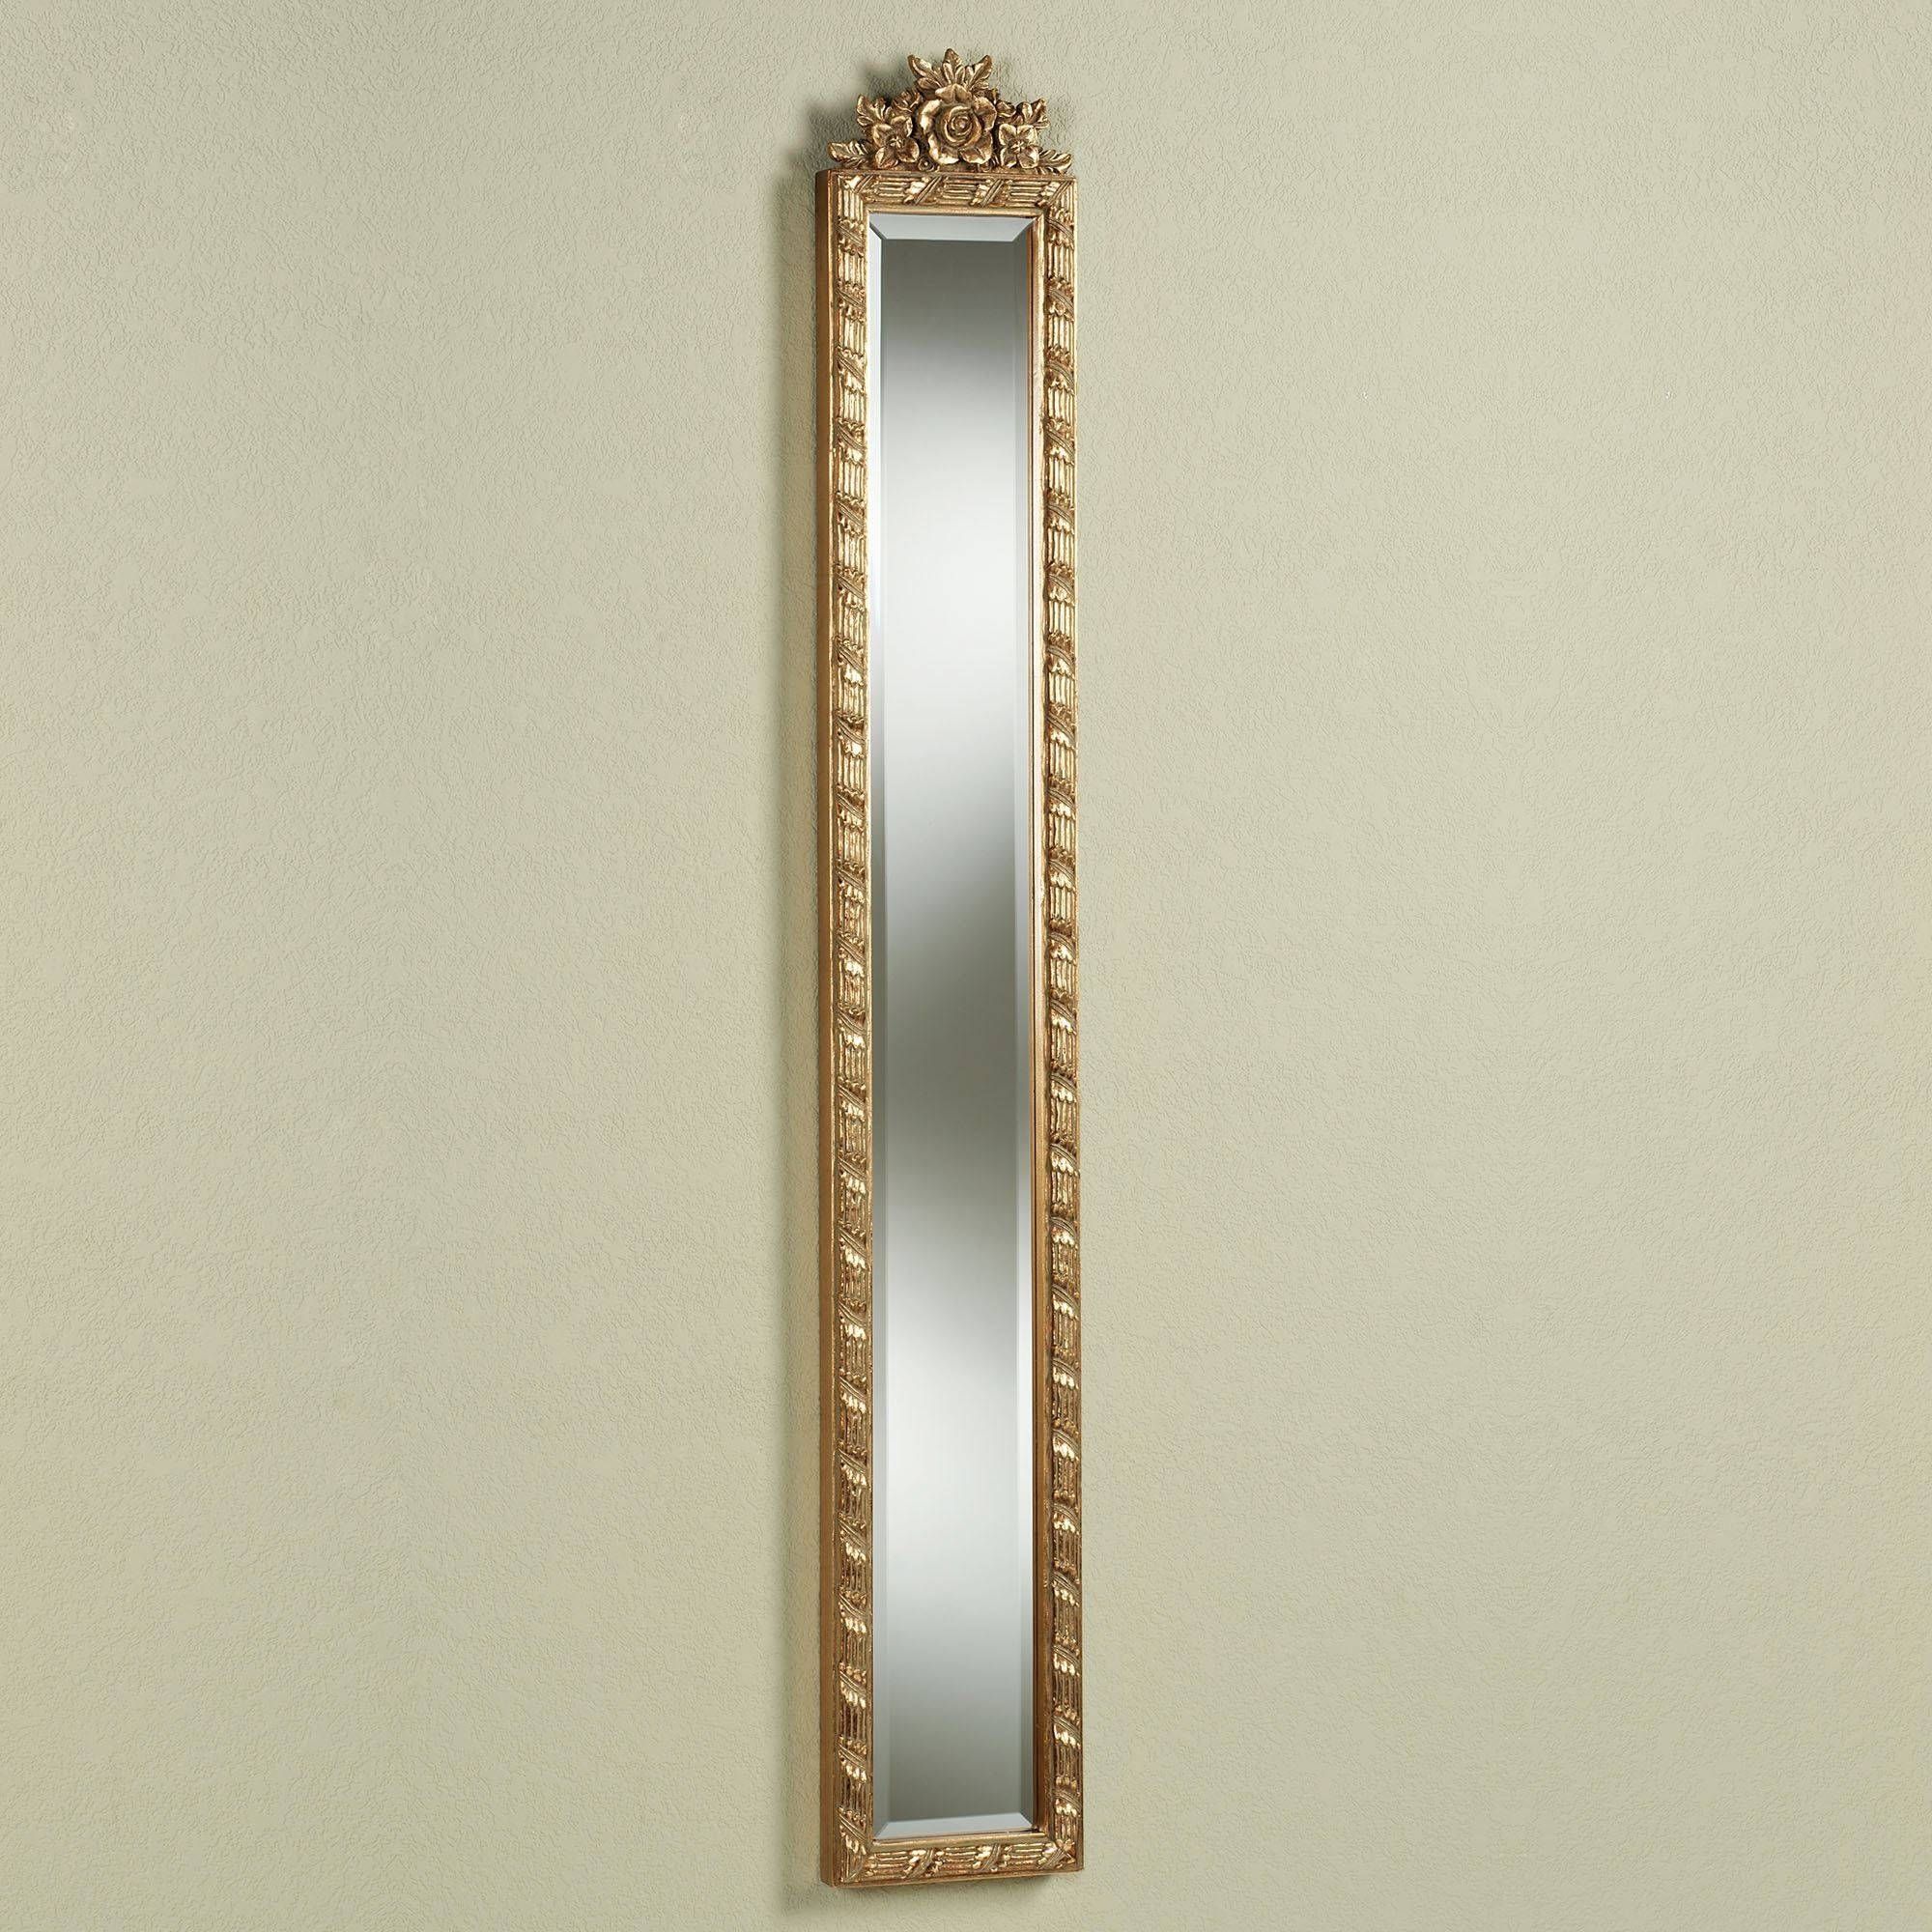 Giuliana Antique Gold Floral Wall Mirror Panel In Vintage Long Mirrors (View 12 of 15)